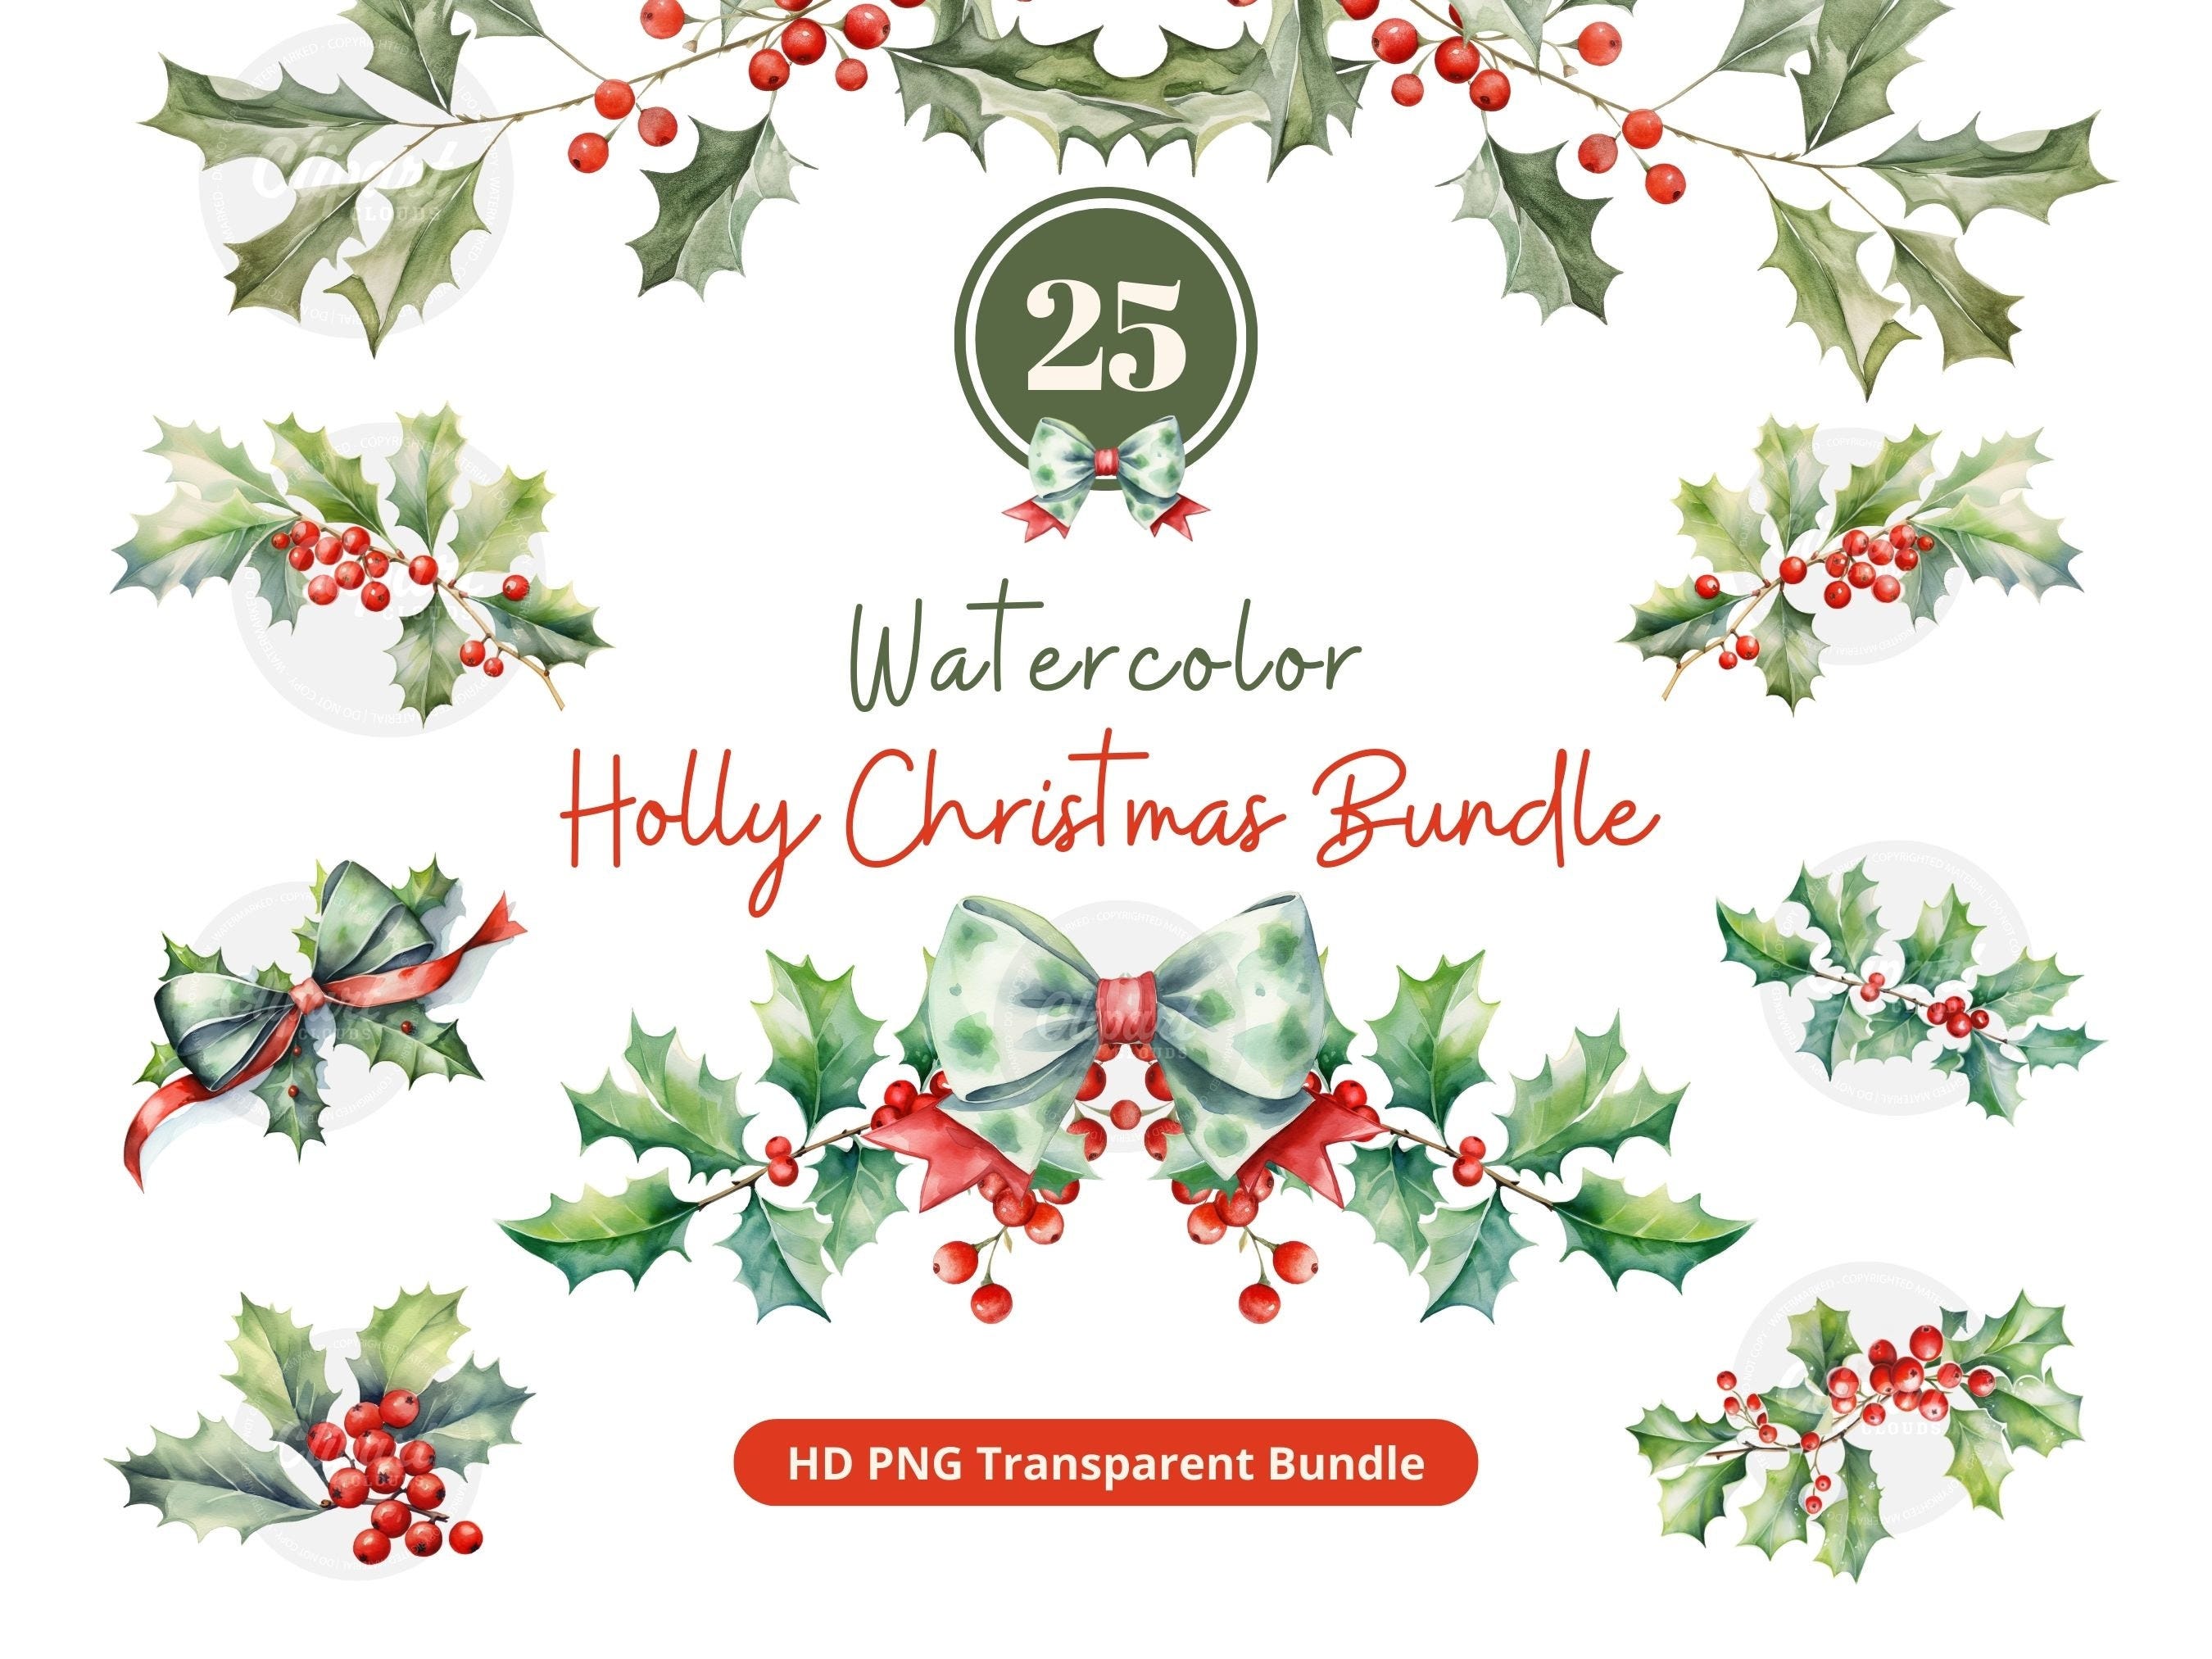 Holly Watercolor Christmas Clipart Bundle 25 PNGs | Christmas Holly Red Berry, Christmas Foliage, Commercial use | Instant Download